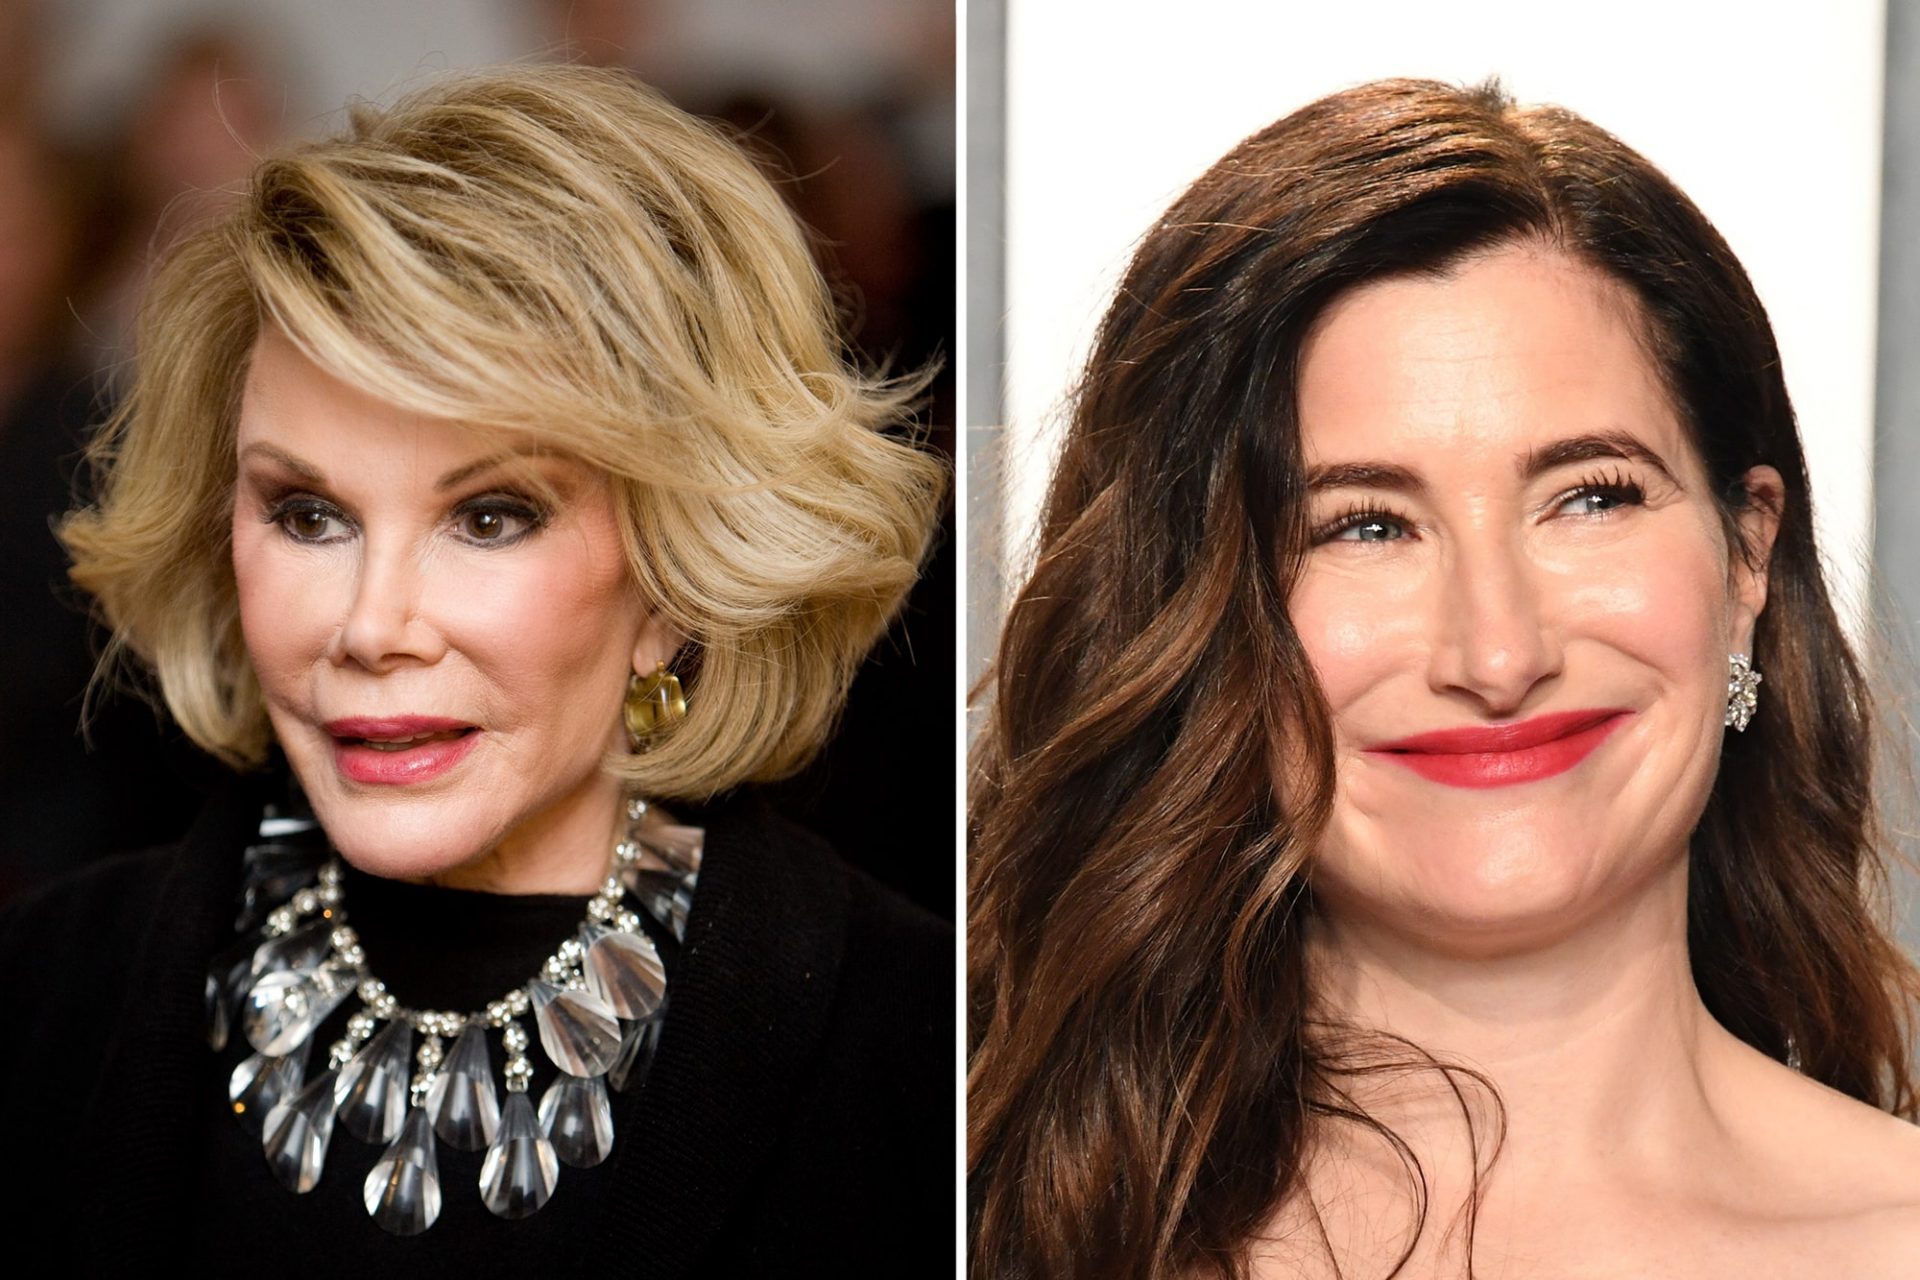 Joan Rivers bio series starring Kathryn Hahn scrapped by Showtime